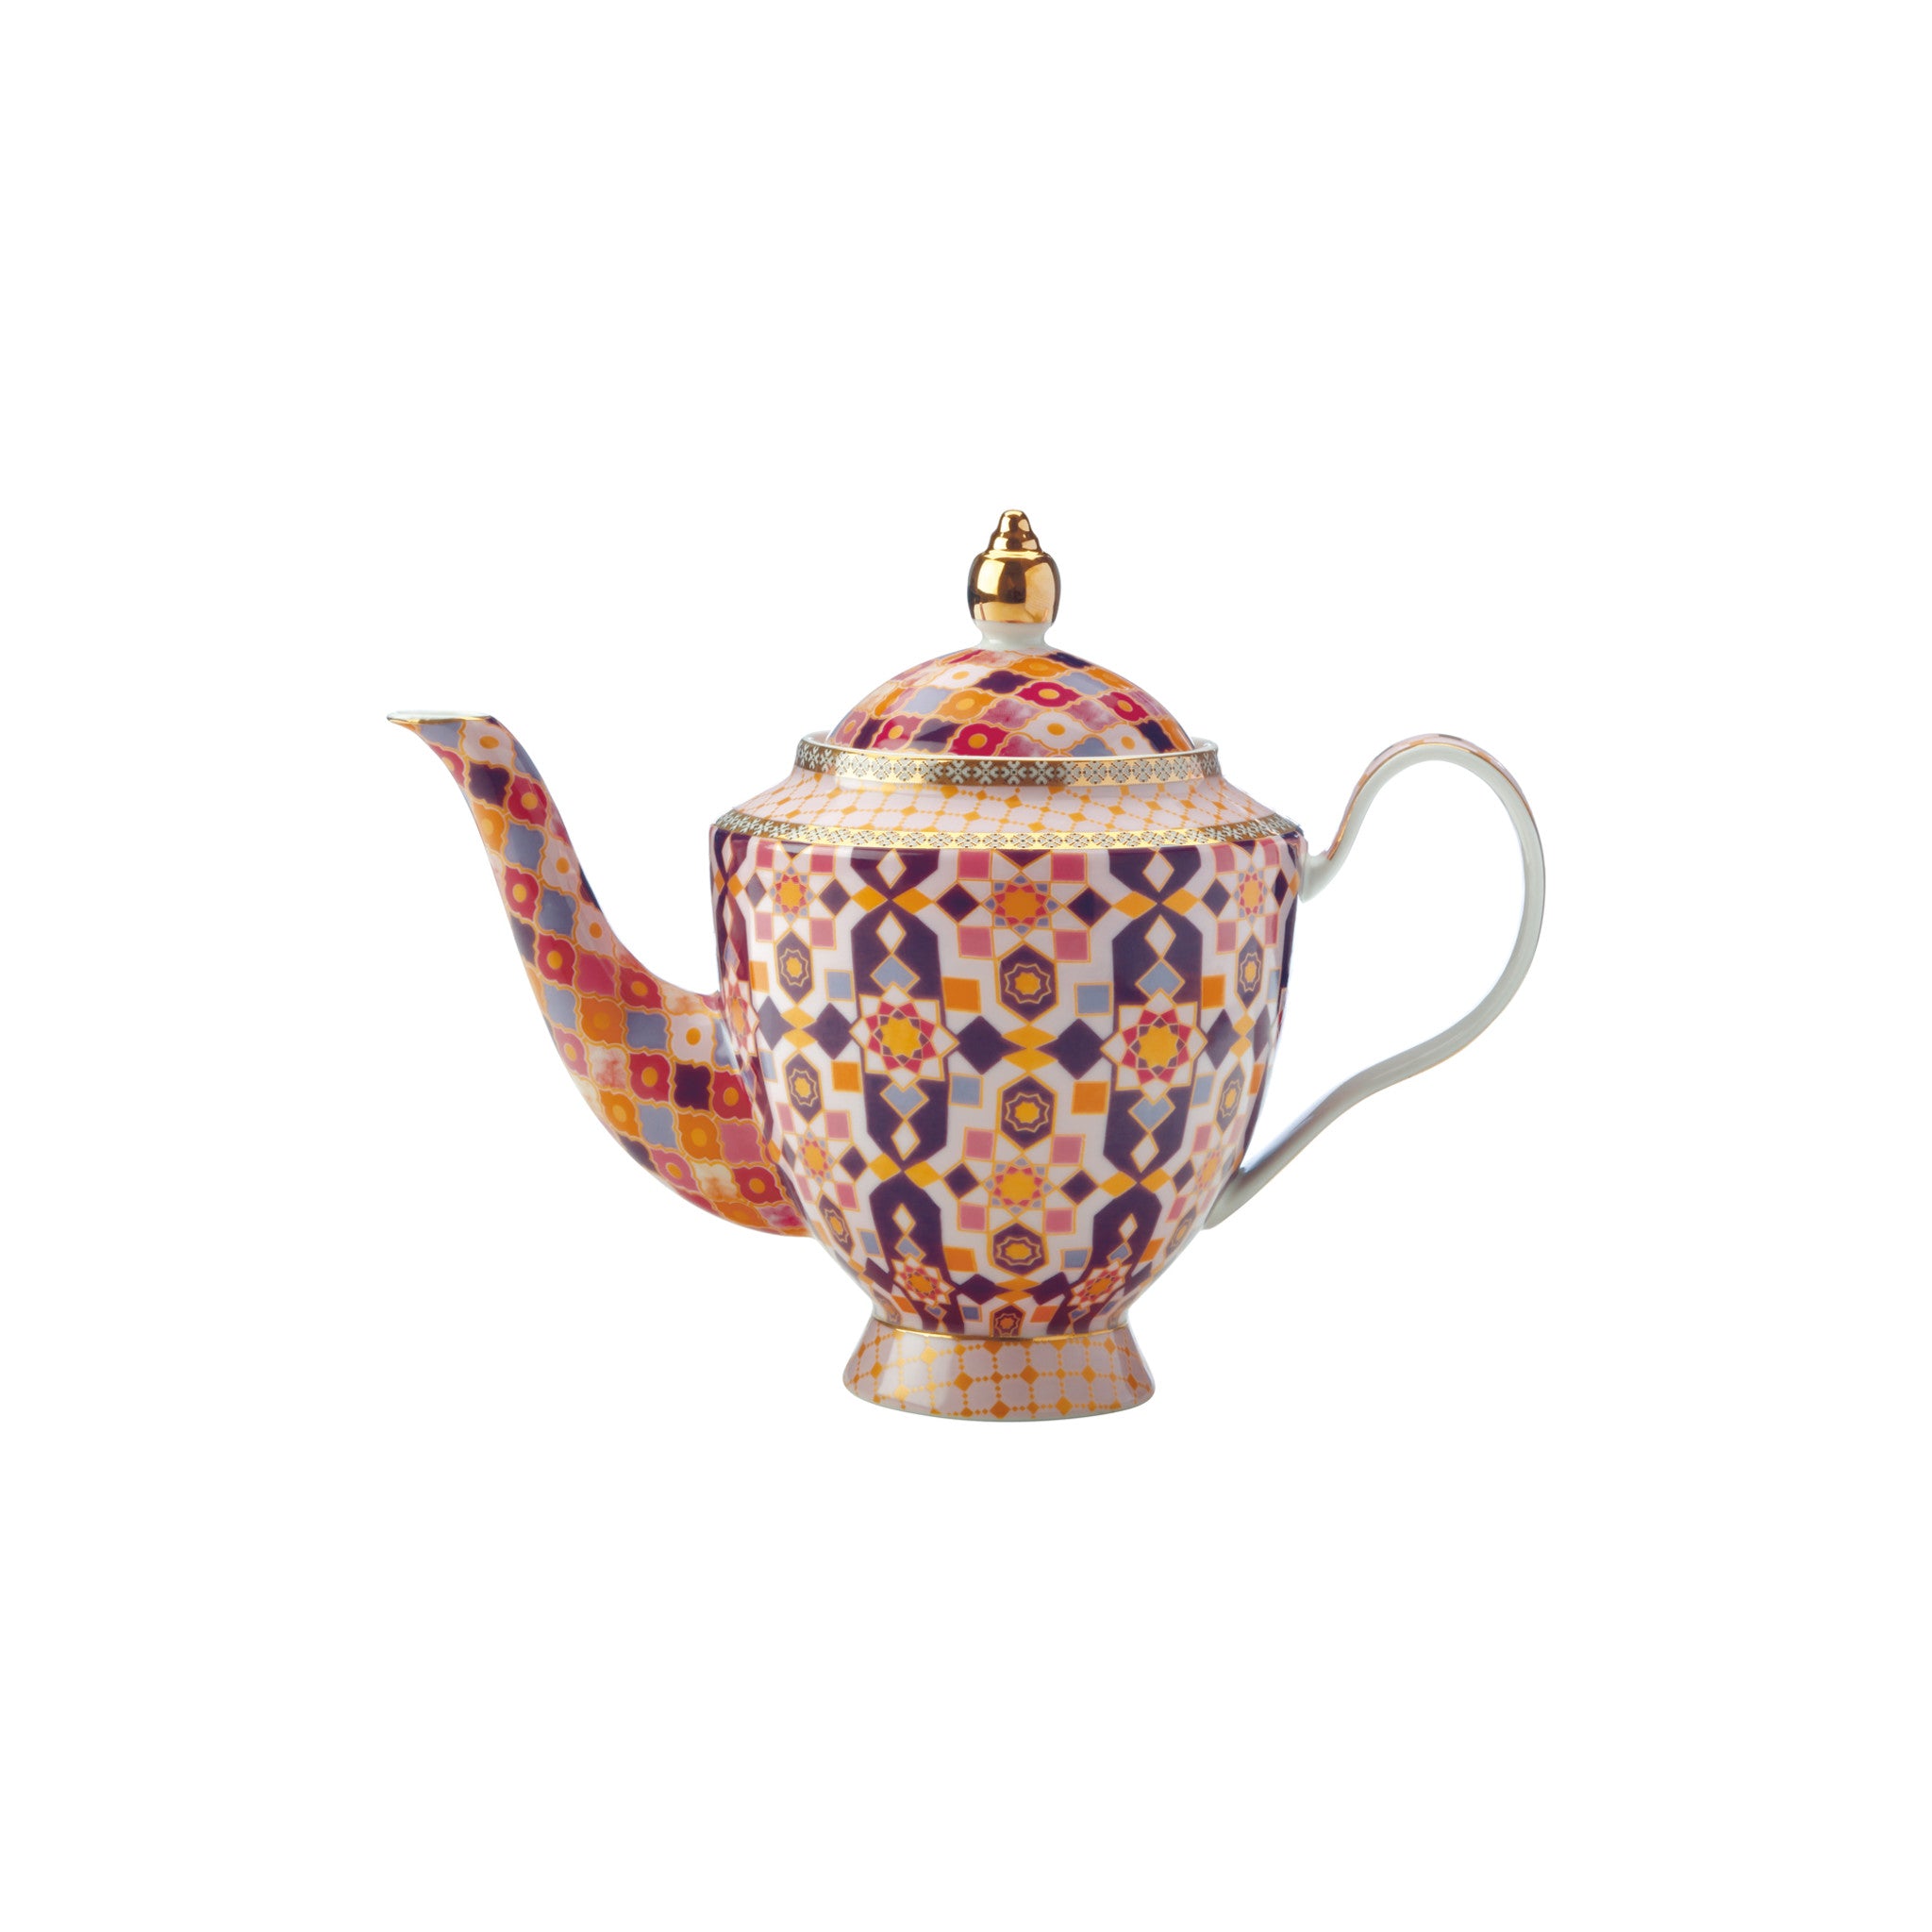 Maxwell & Williams Teas & C's Kasbah Rose 500ml Teapot with Infuser 